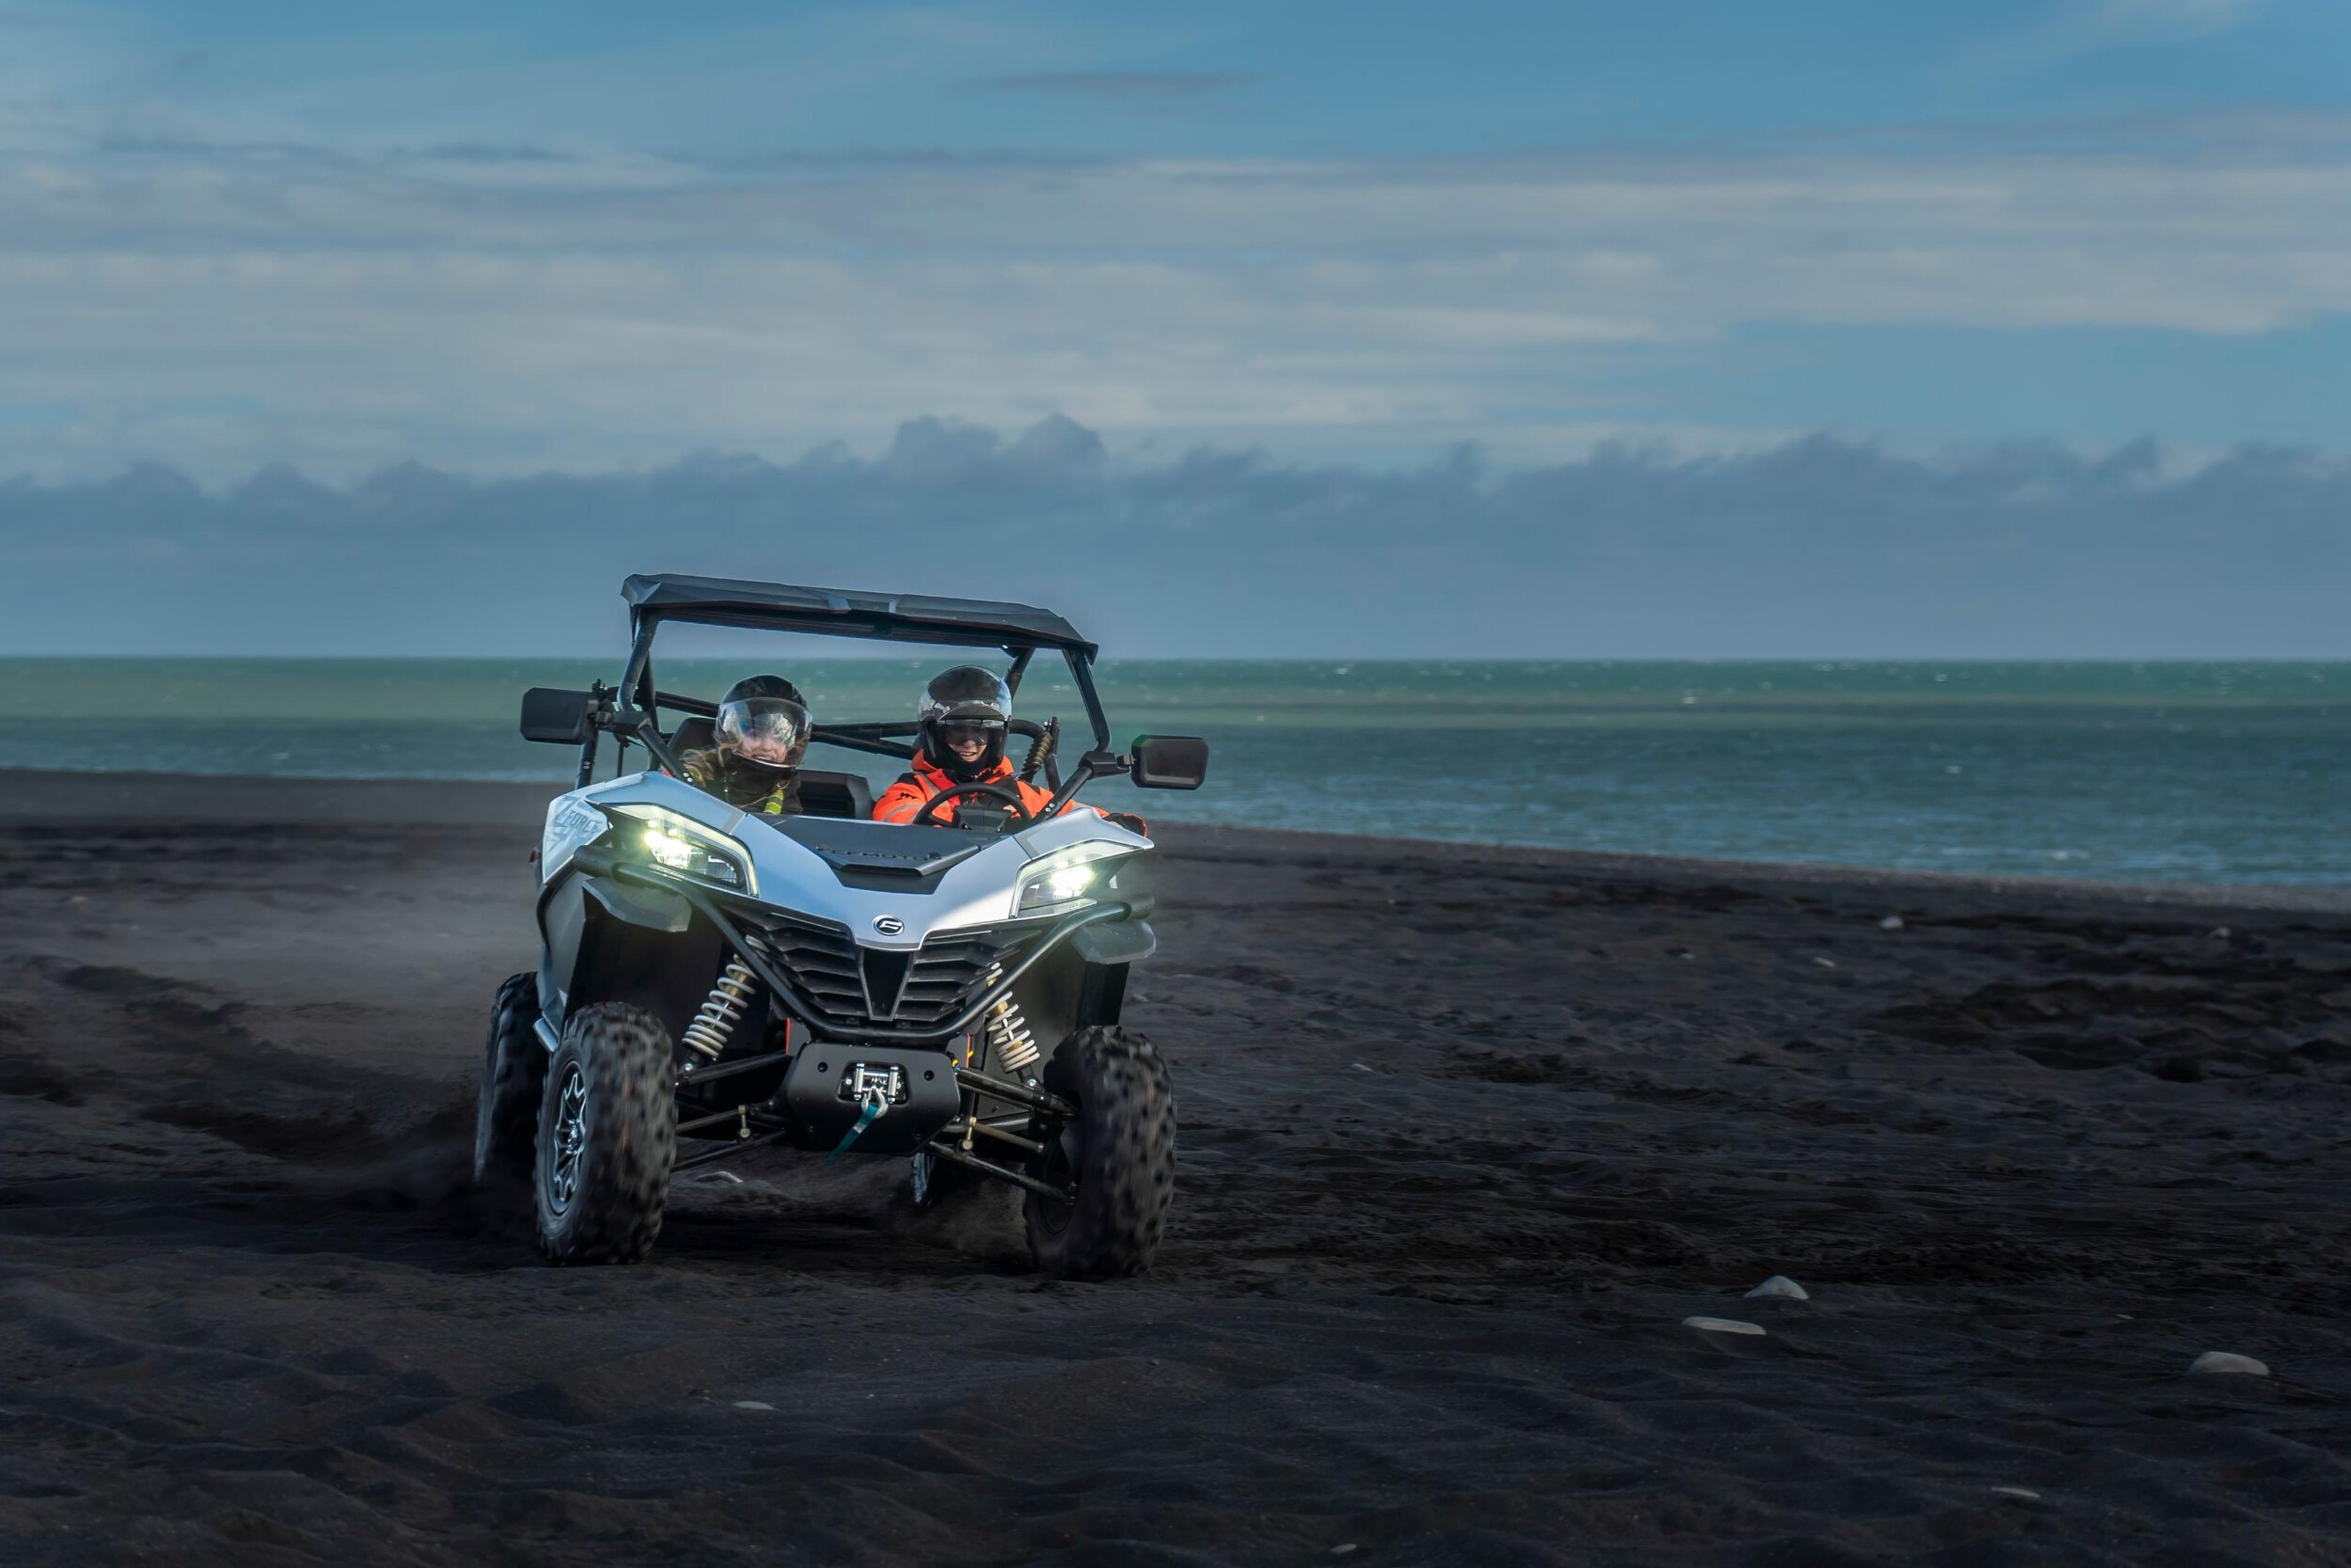 A side-by-side all-terrain vehicle (ATV) with two riders wearing helmets and high-visibility clothing is on a dark sandy beach, with the ocean in the background and a mountain range on the horizon under a twilight sky.